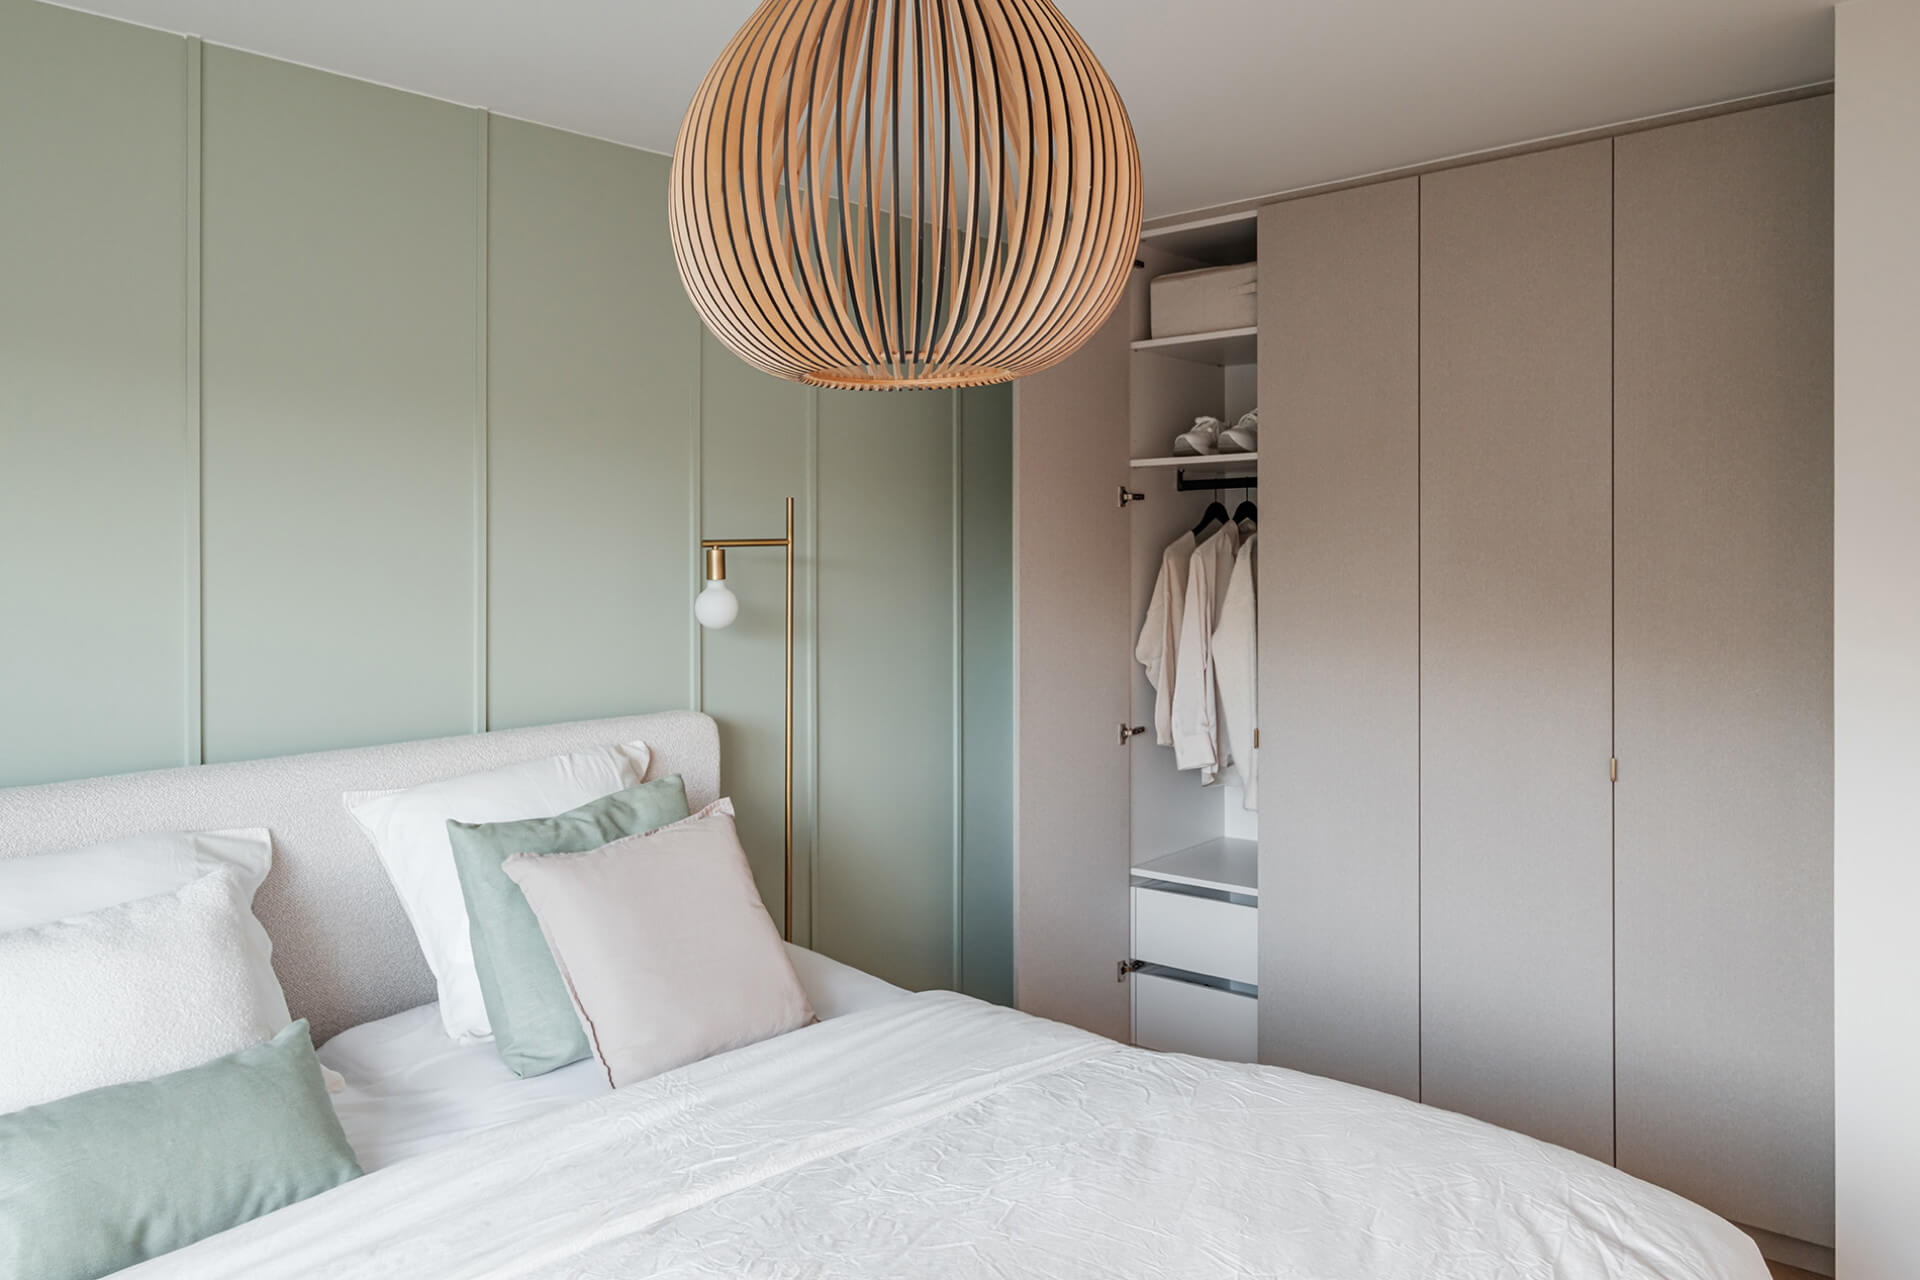 Bedroom with a built-in dressing room in natural colors